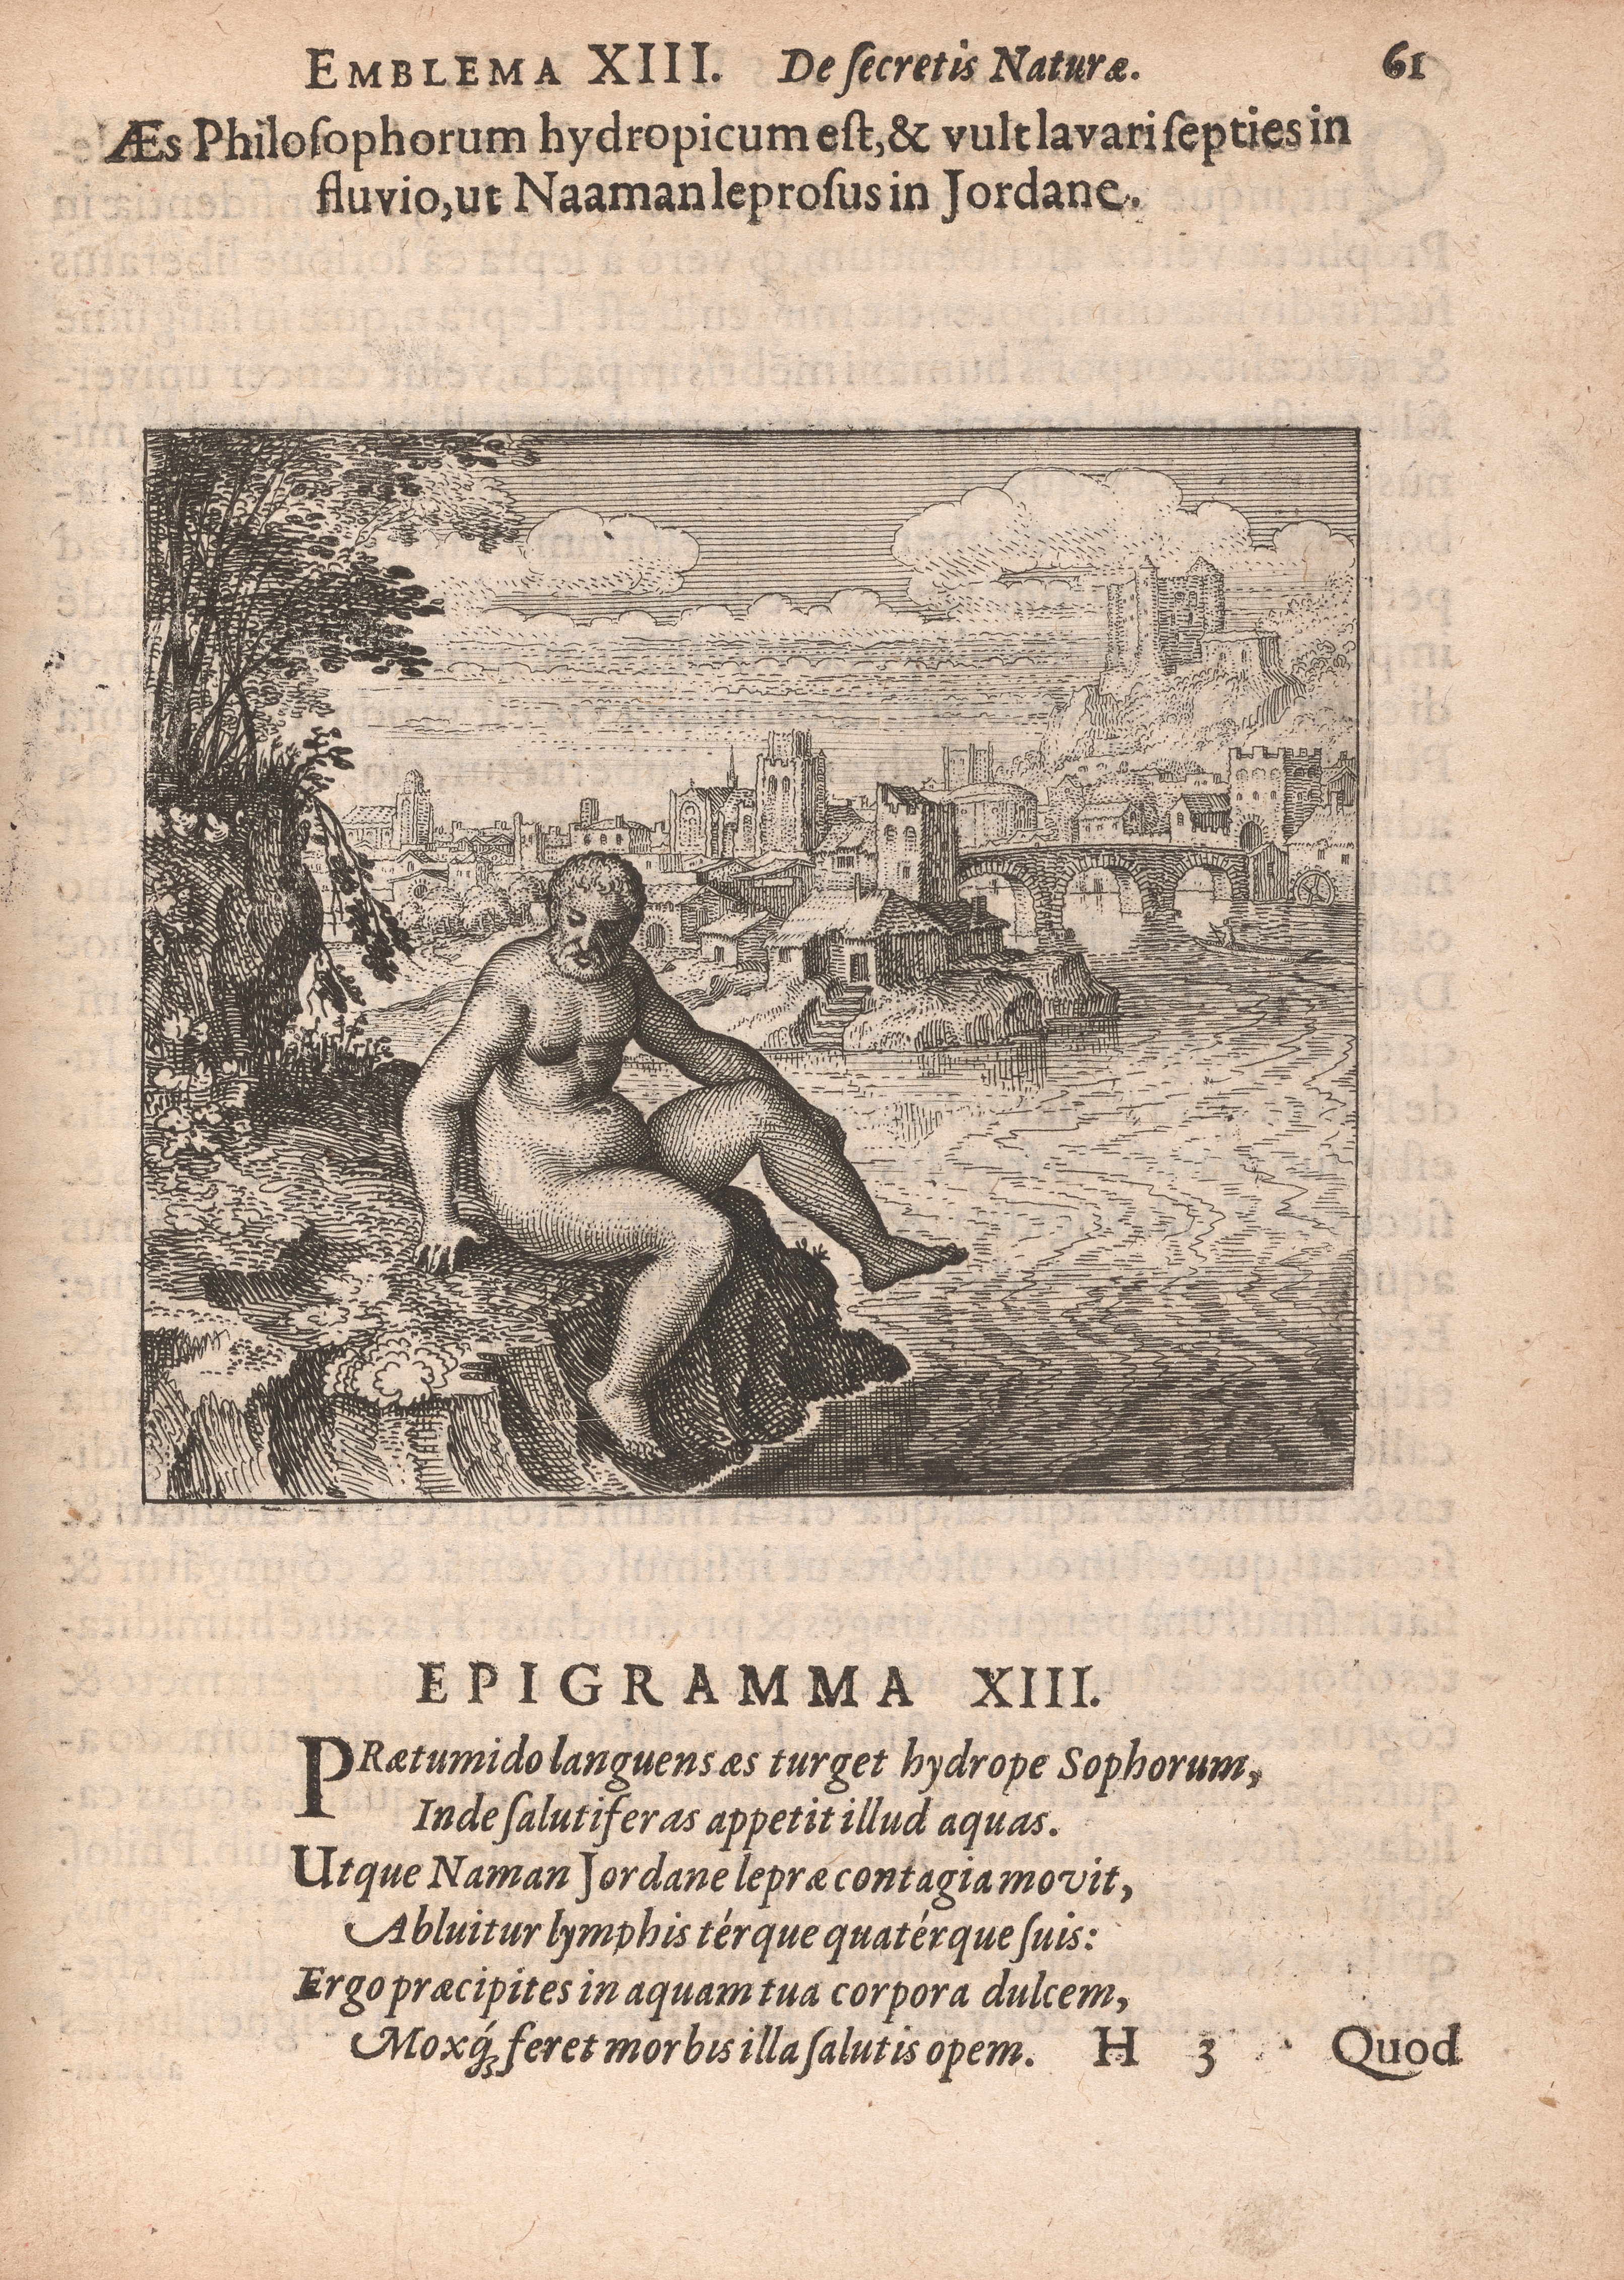 The second page of emblem 13 of Atalanta fugiens, which shows a motto and epigram in Latin and an image. The image shows a nude leprous man, identified as Naaman, is sitting on a bank and washing in the river. Behind him is a cityscape with a bridge.